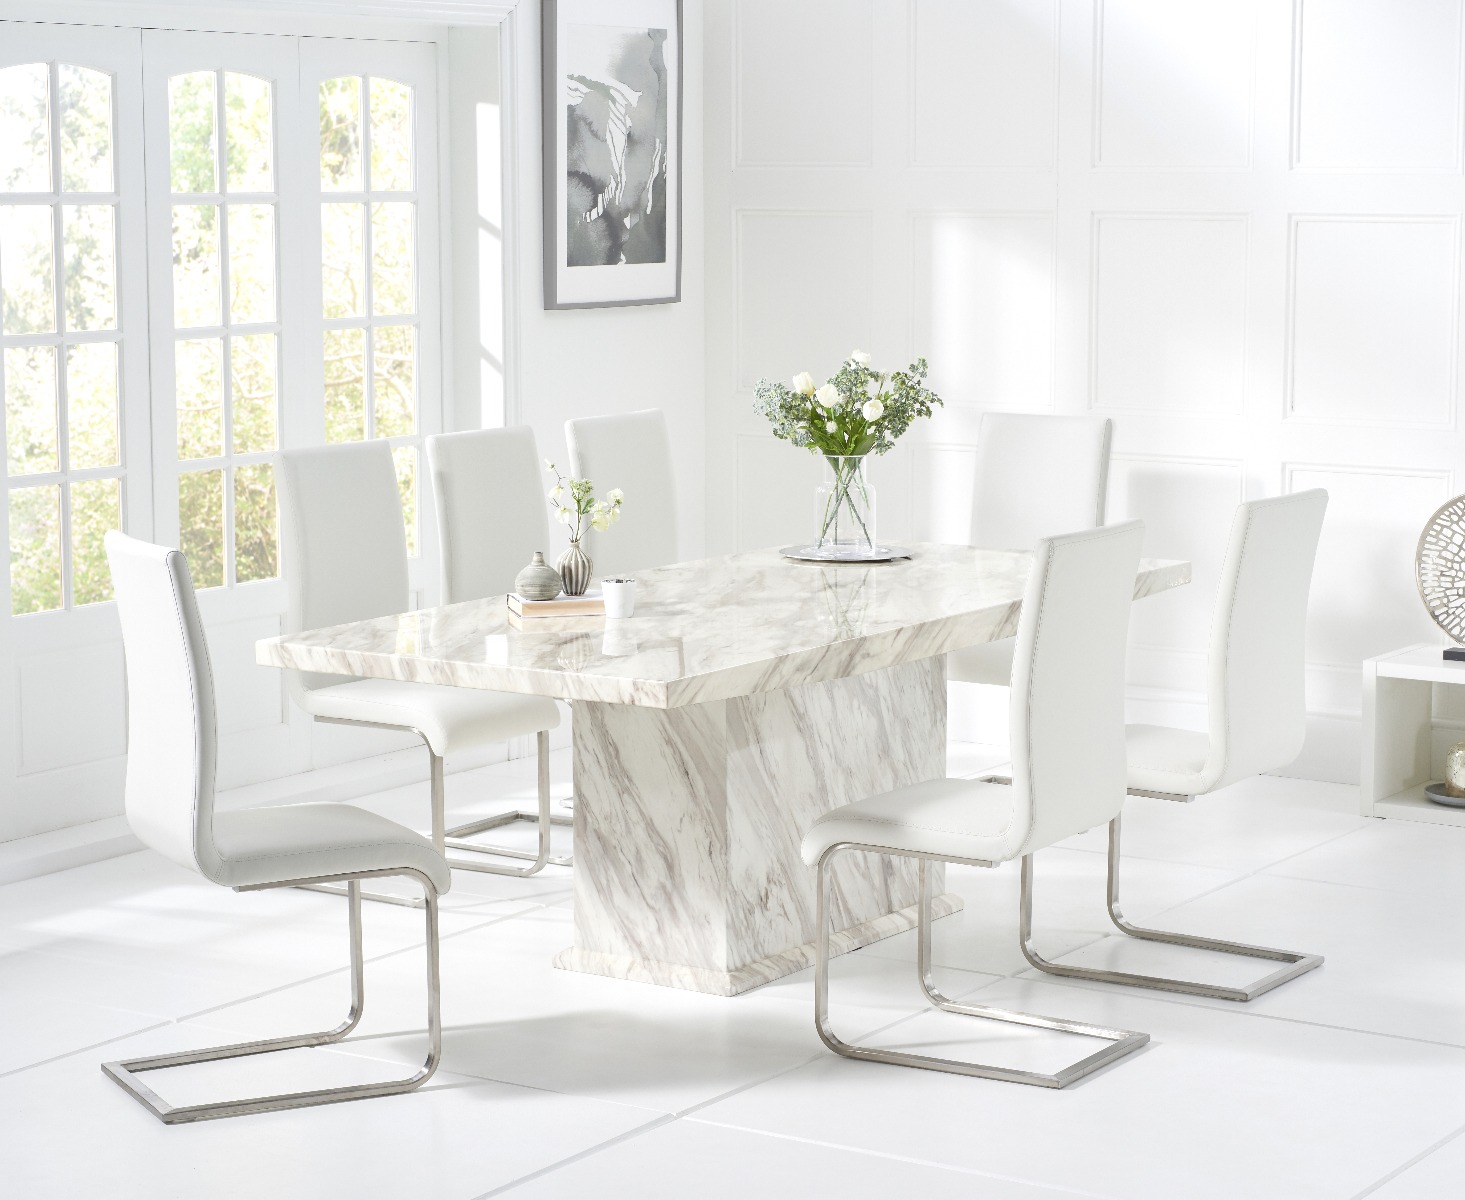 Calacatta 220cm Marbleeffect Dining Table With 6 White Malaga Chairs